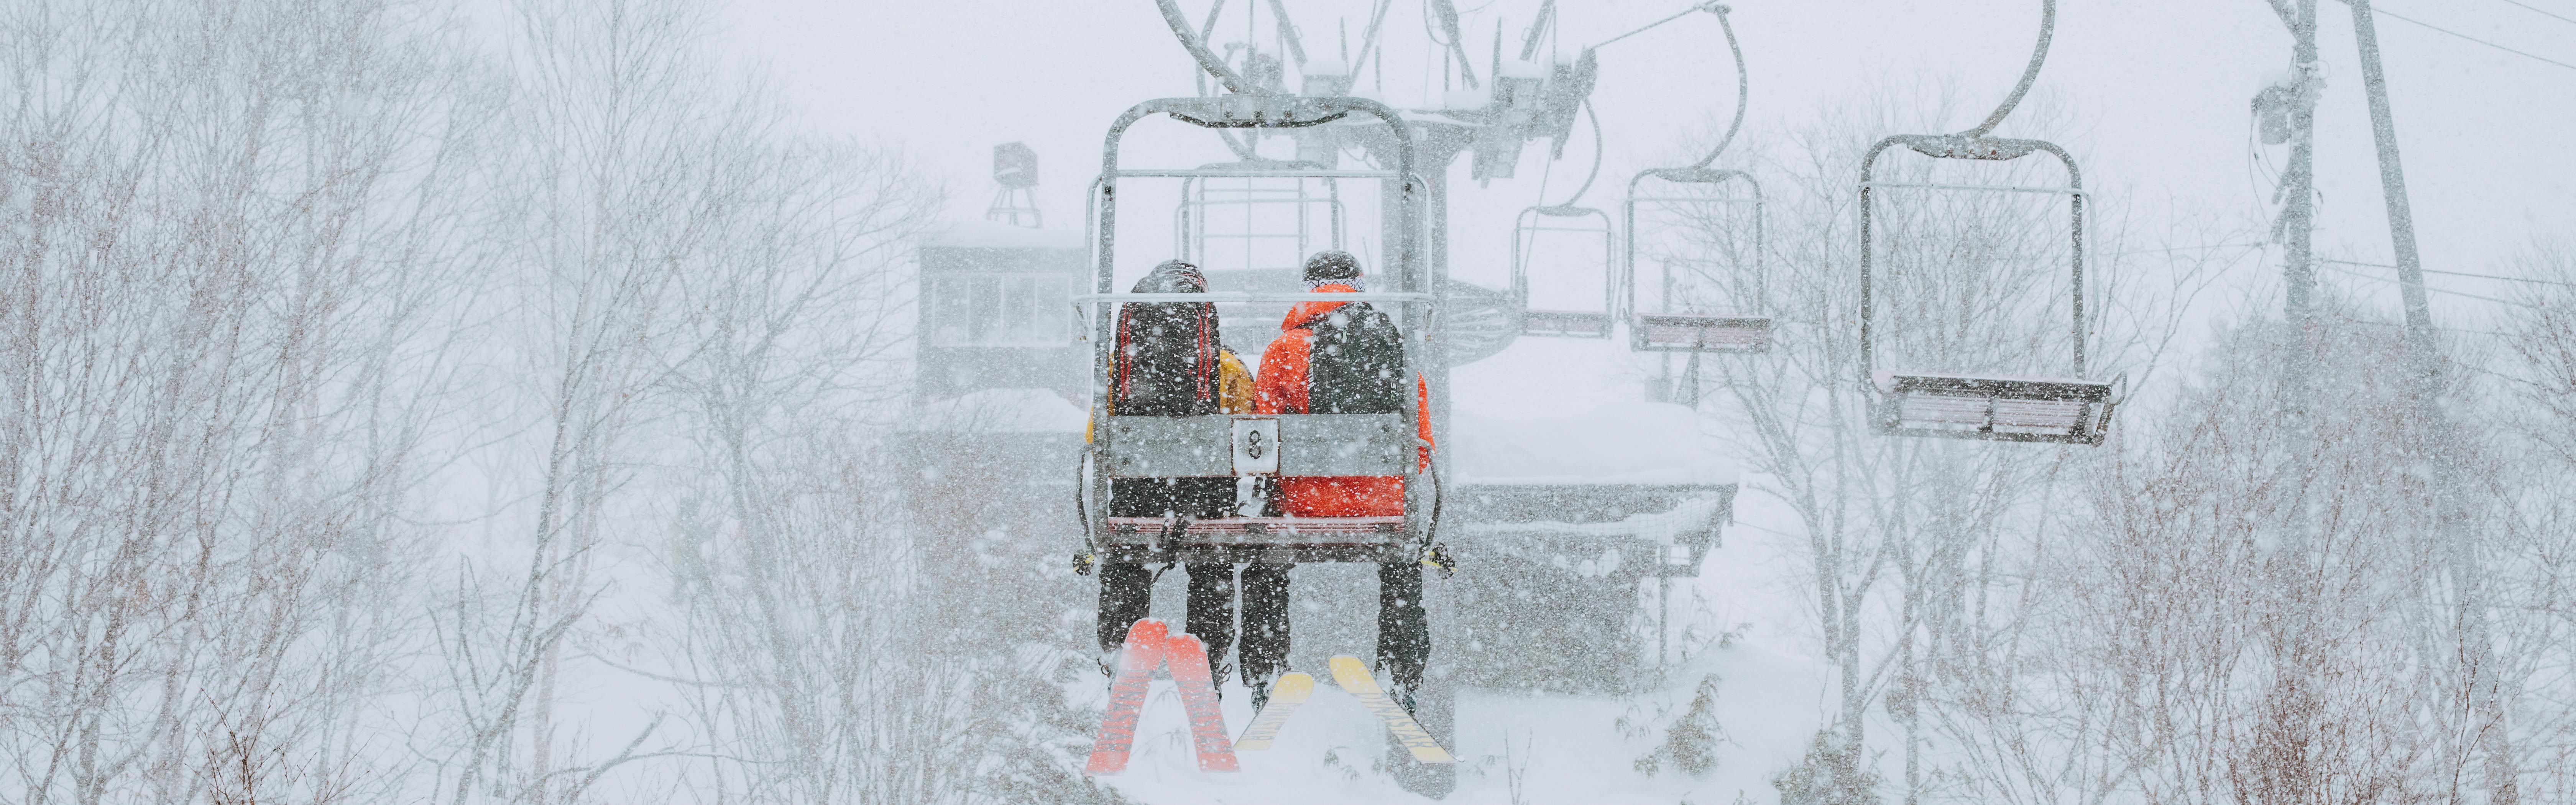 Two skiers sit on a chairlift on a snowy day.